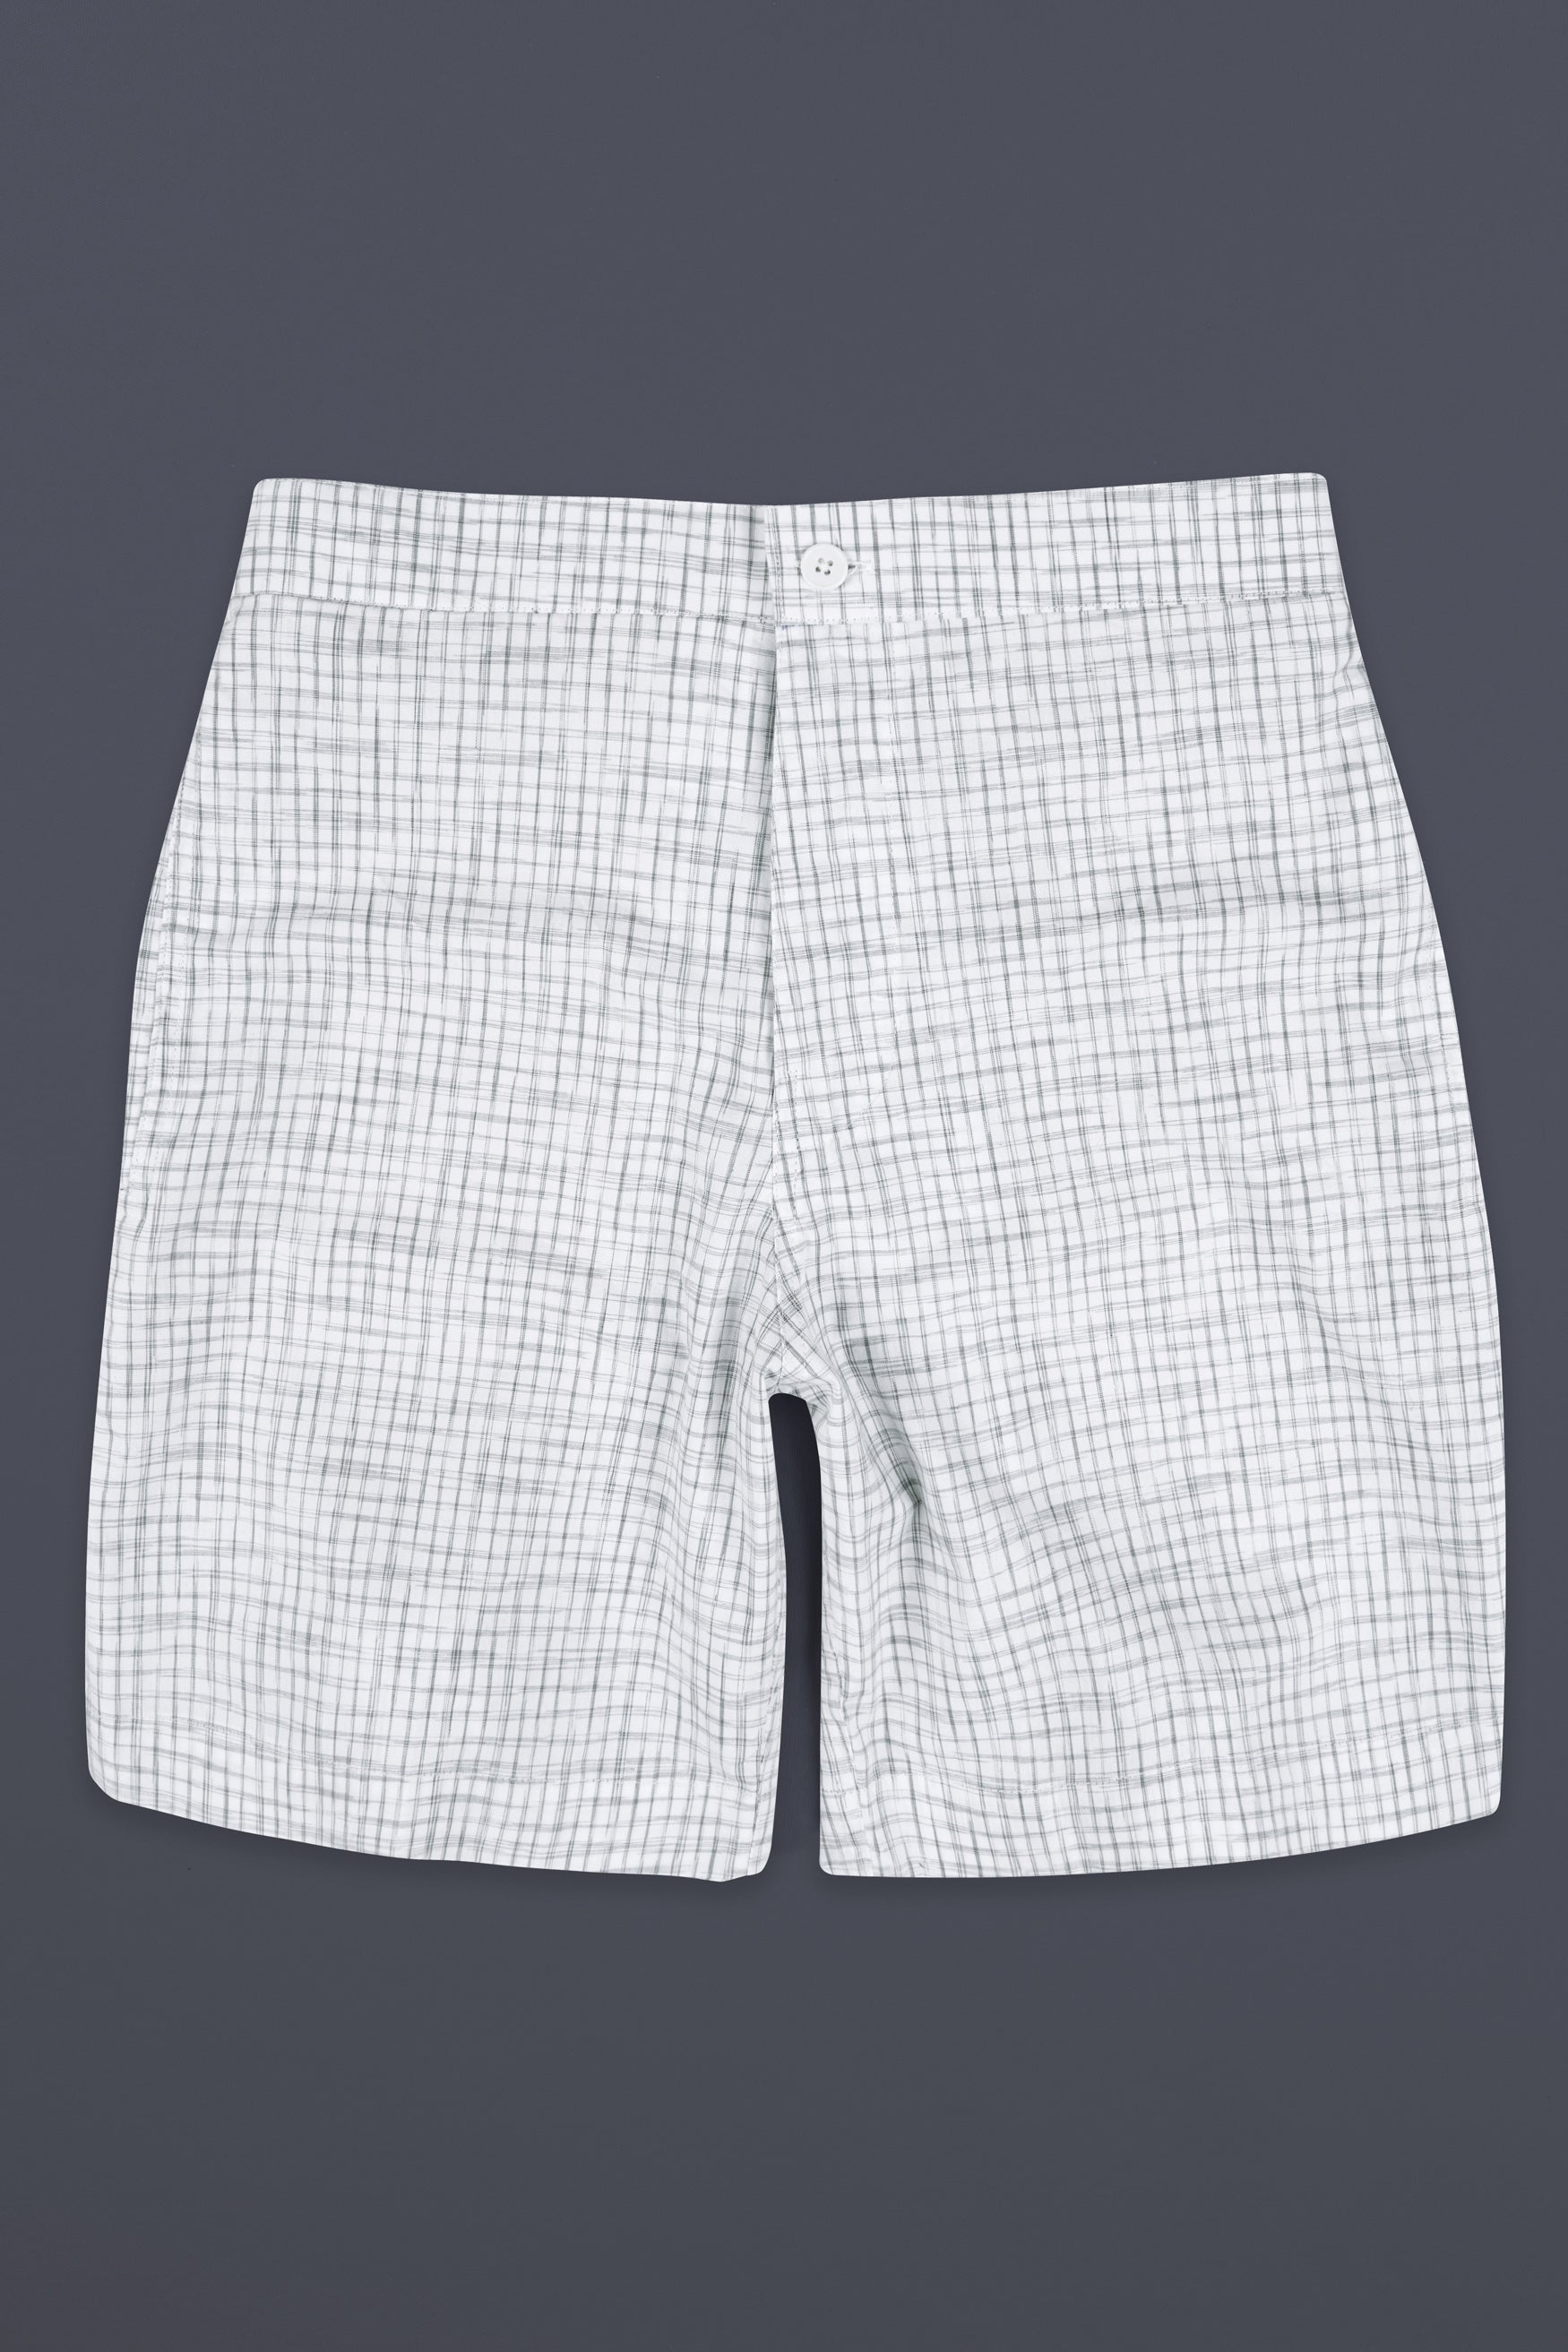 Bright White and Mountain Mist Gray Checkered Premium Cotton Shorts SR397-28, SR397-30, SR397-32, SR397-34, SR397-36, SR397-38, SR397-40, SR397-42, SR397-44